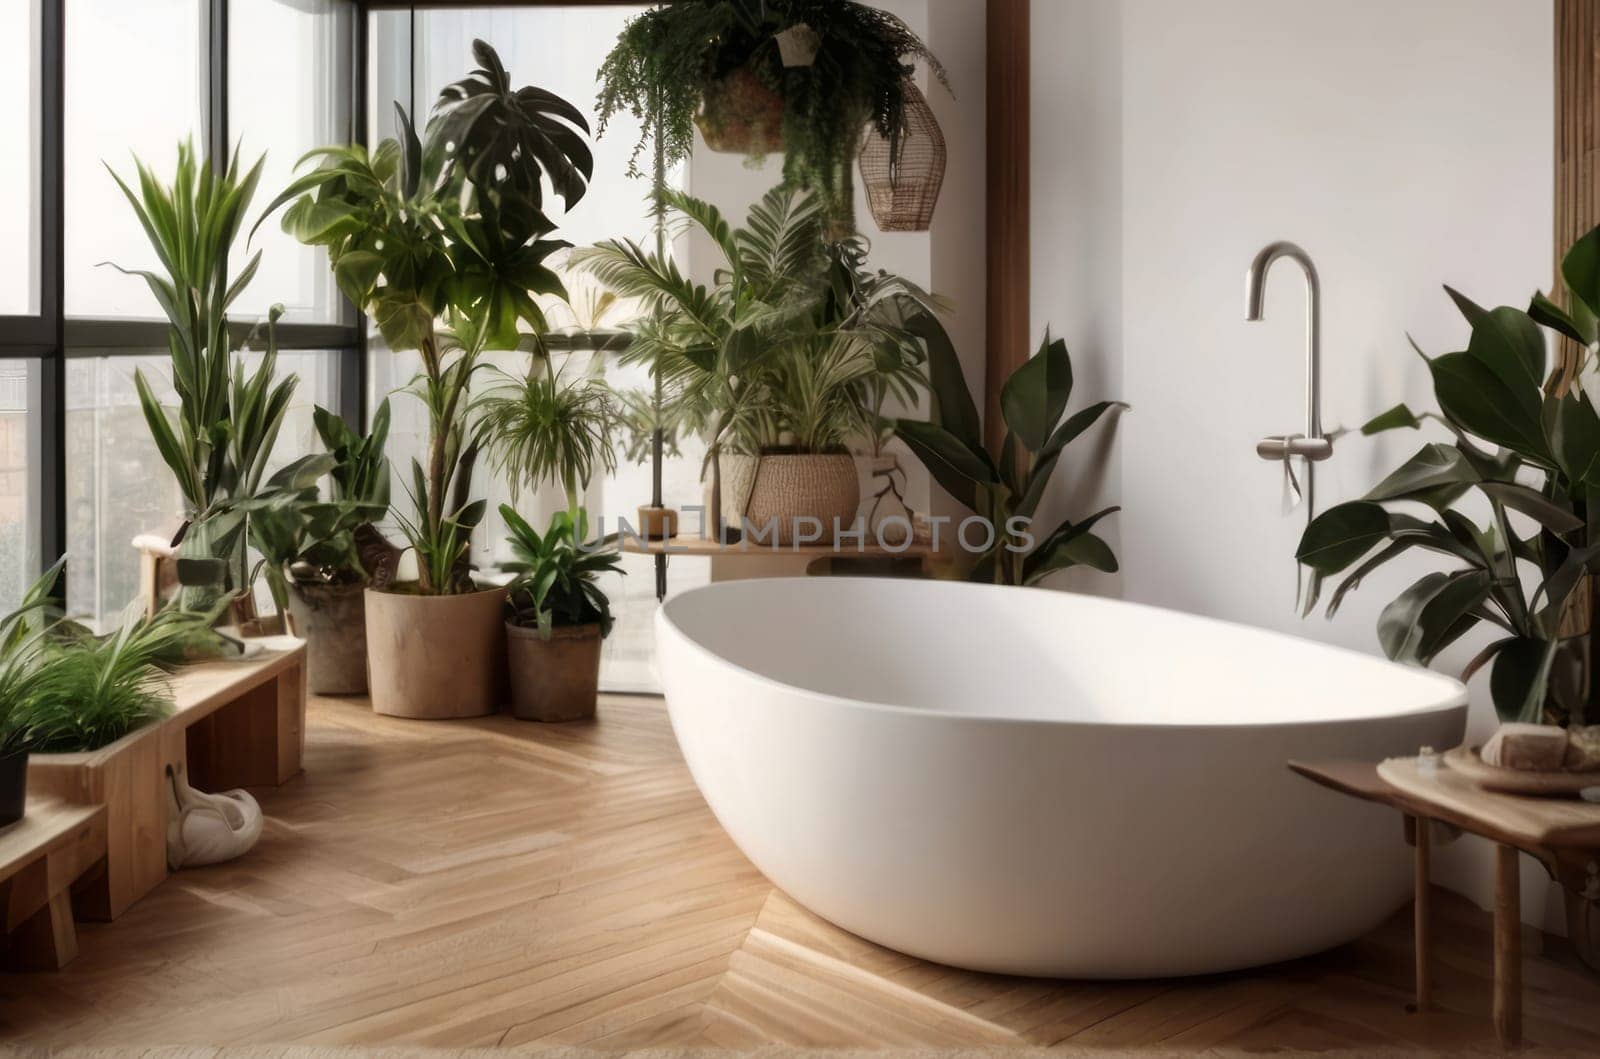 Captivating image showcasing a harmonious blend of white and wooden elements in a home garden bathroom, adorned with a variety of houseplants that infuse the space with a refreshing urban jungle vibe